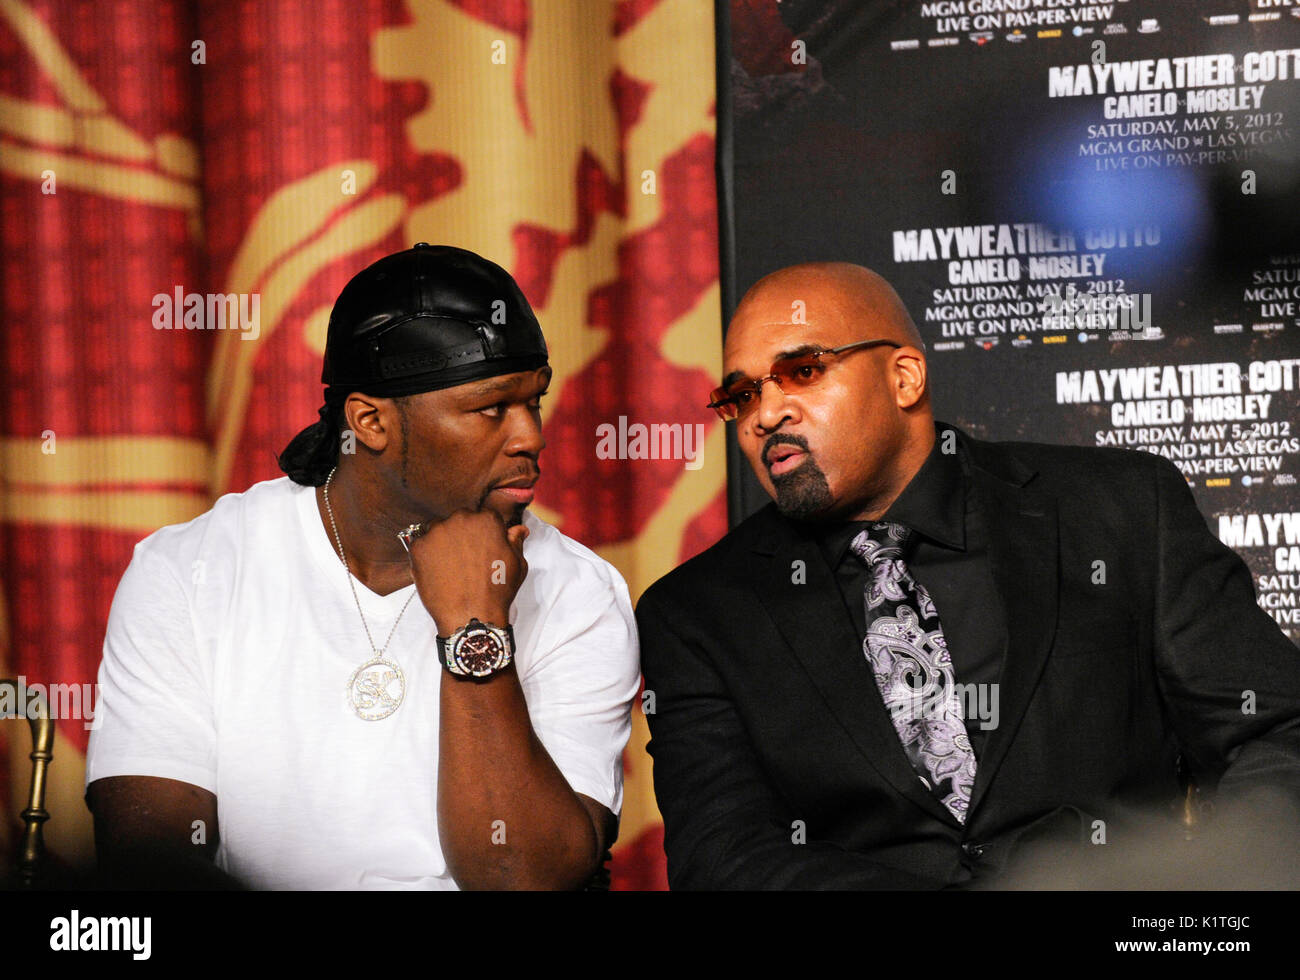 Rapper 50 Cent (l) Leonard Ellerbe attends press conference Grauman's Chinese Theatre Hollywood March 1,2012. Mayweather Cotto will meet WBA Super Welterweight World Championship fight May 5 MGM Grand Las Vegas. Stock Photo